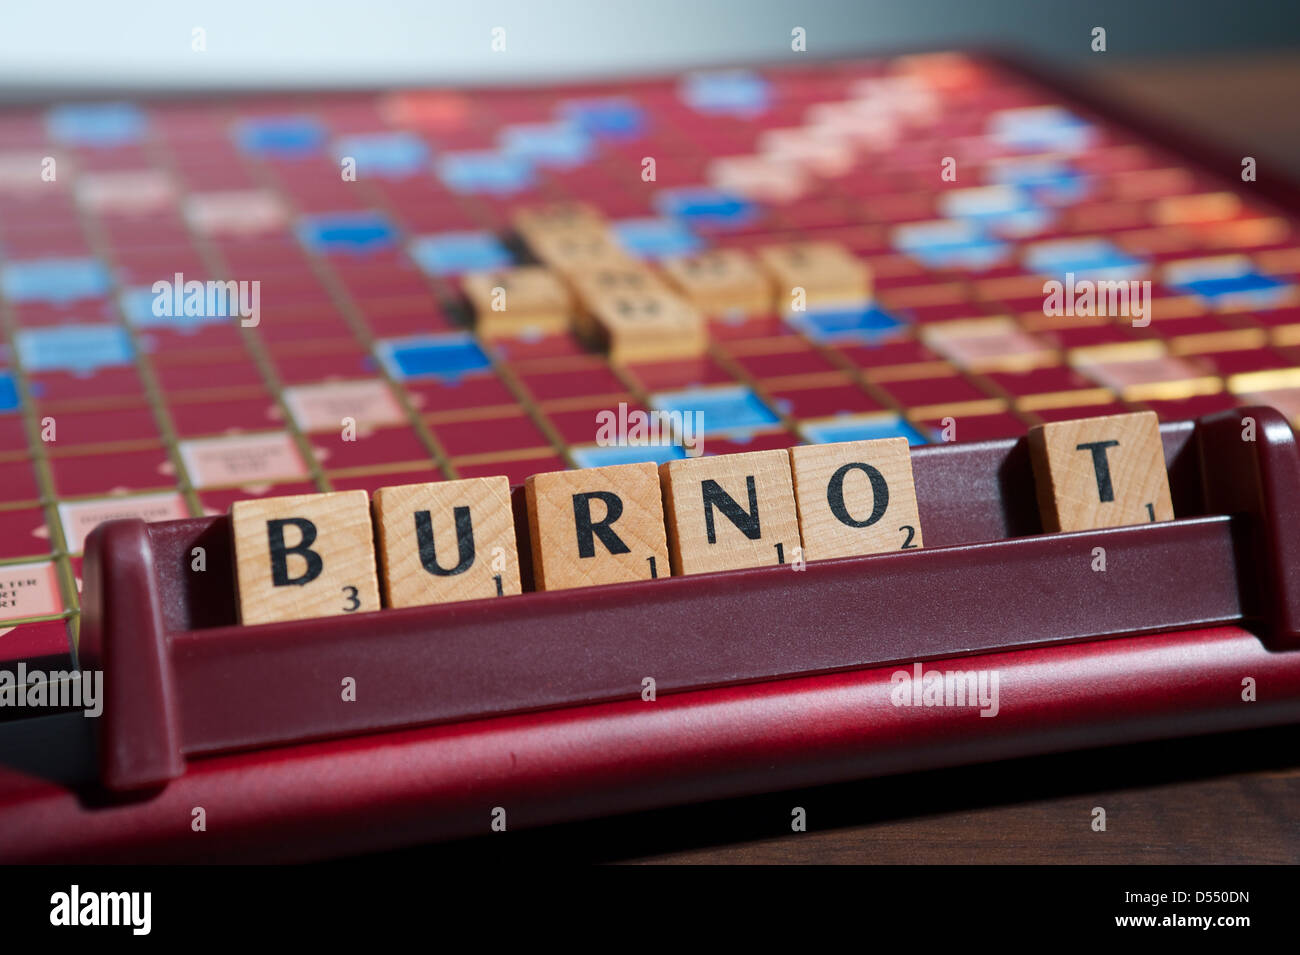 Hamburg, Germany, Scrabble letters form the word Burno T Stock Photo